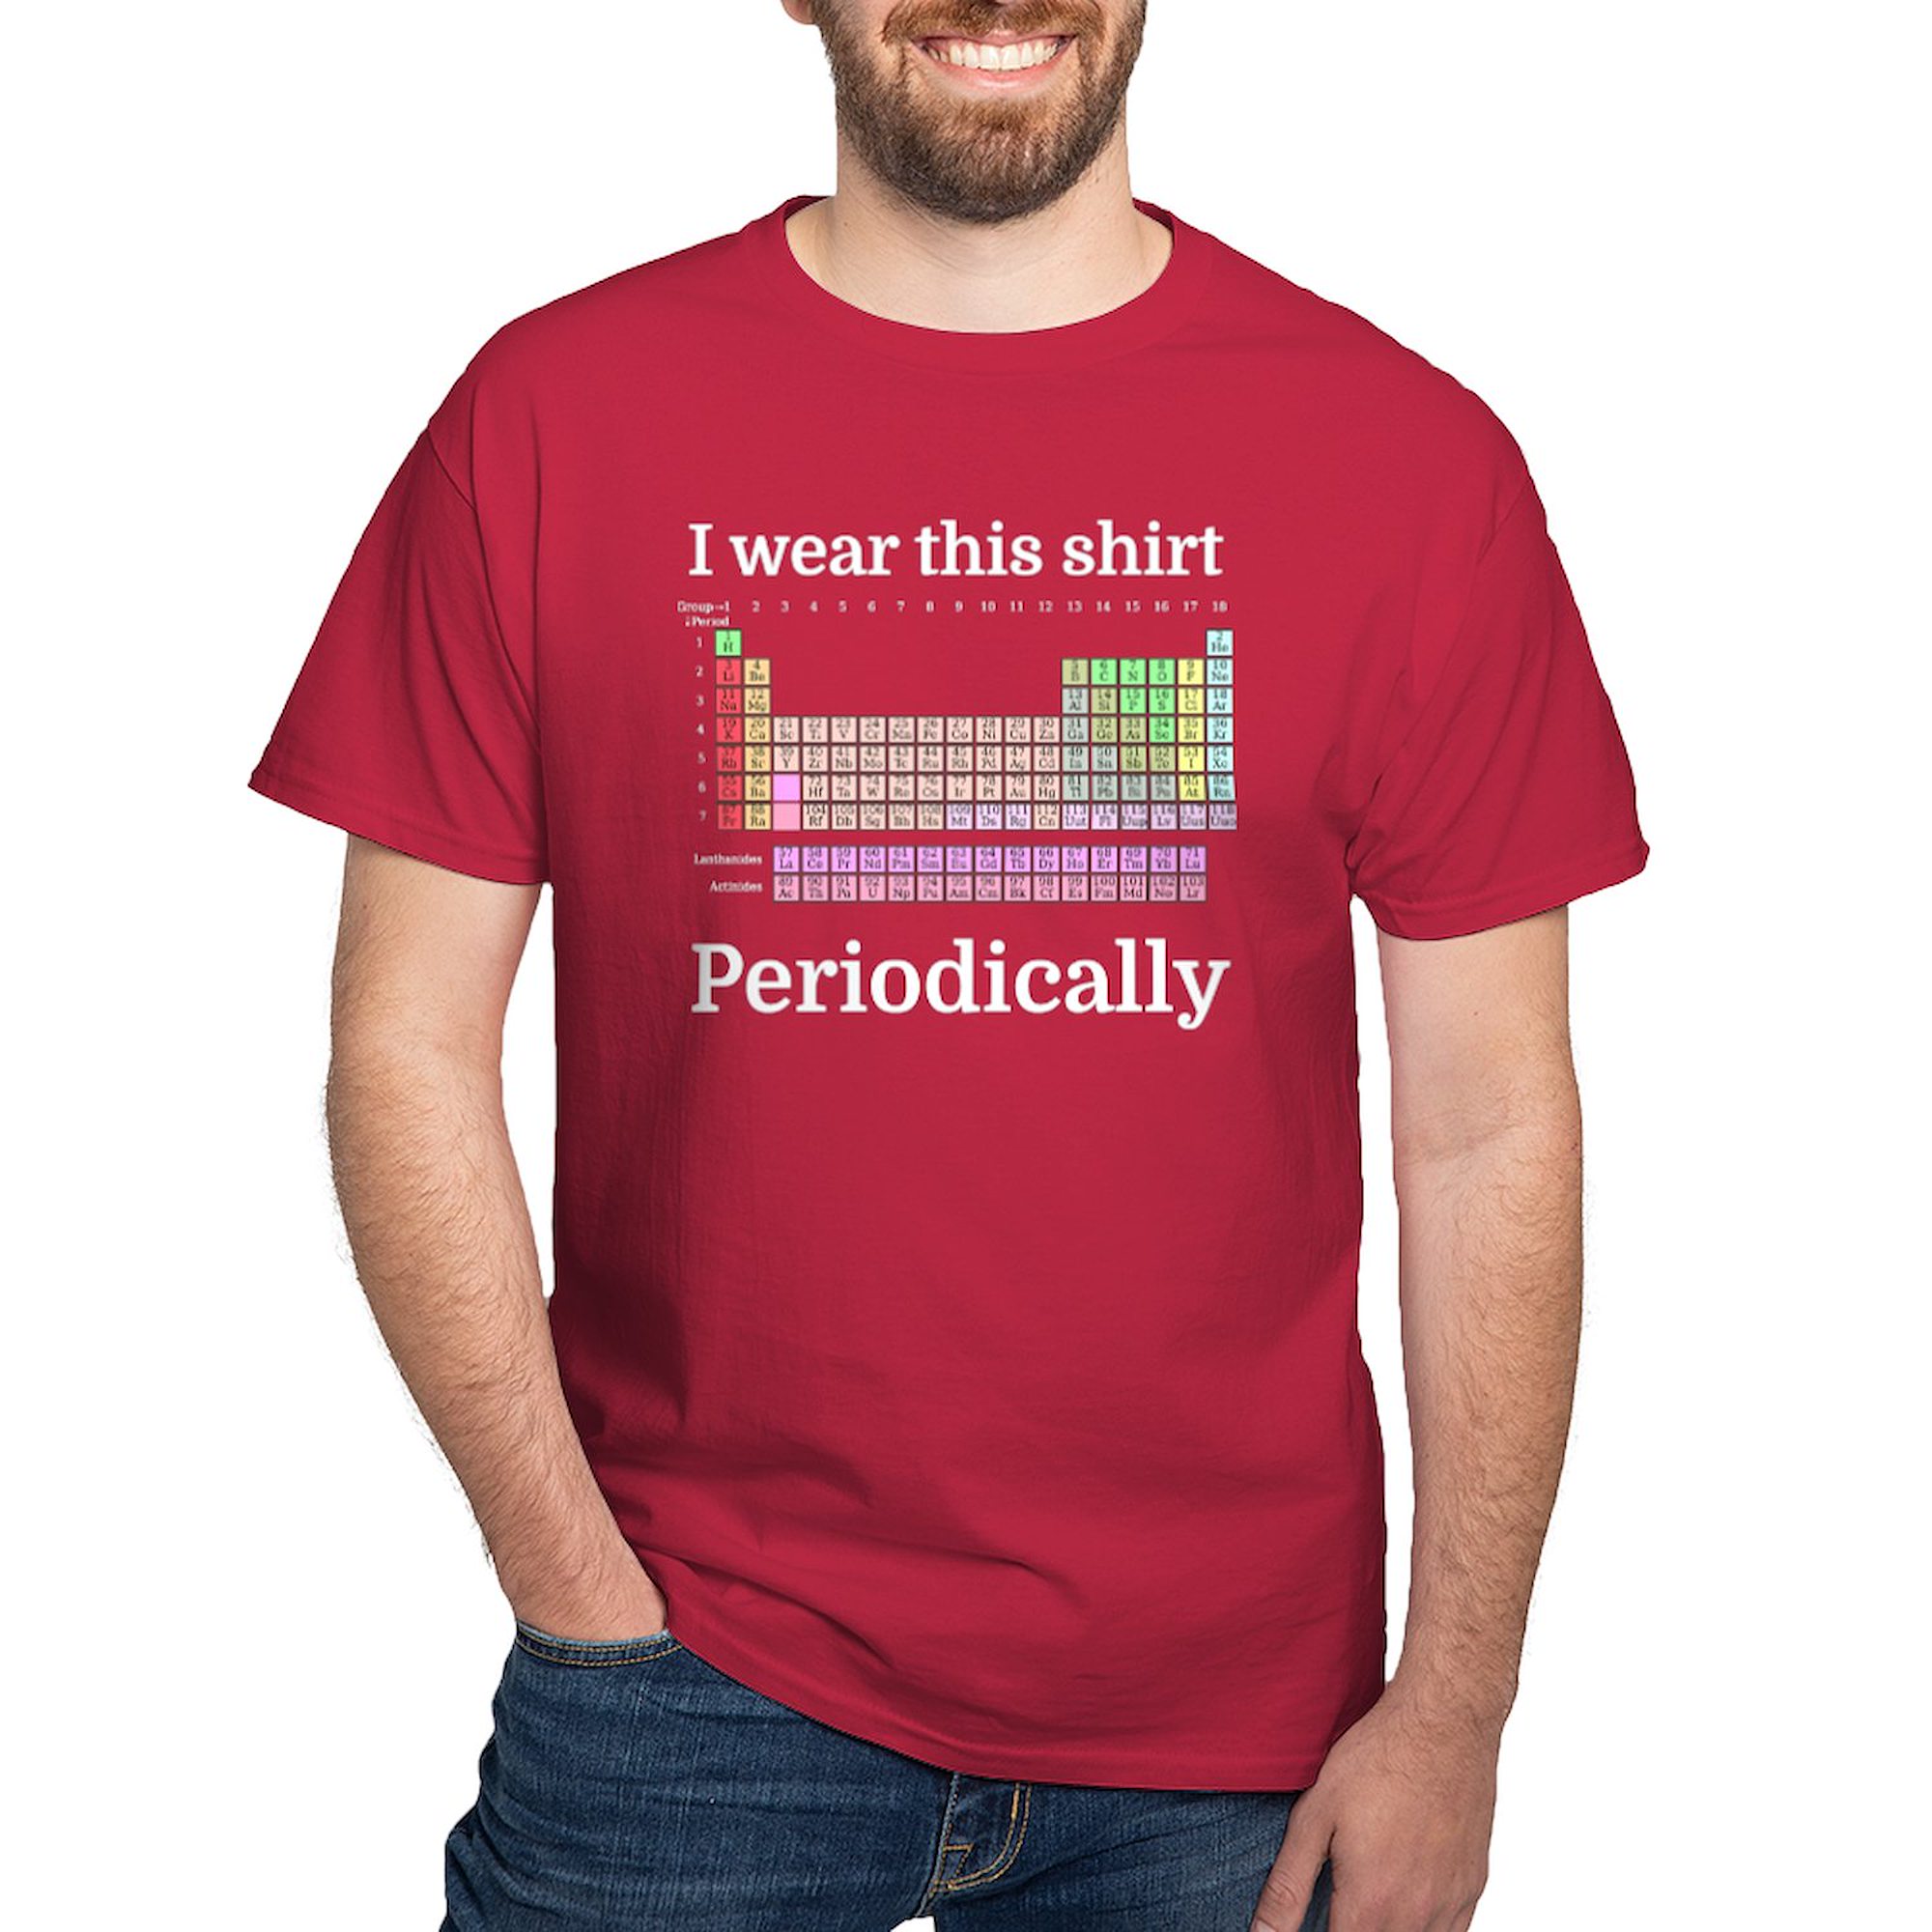 CafePress - I Wear This Shirt Periodically T Shirt - 100% Cotton T-Shirt - image 1 of 4